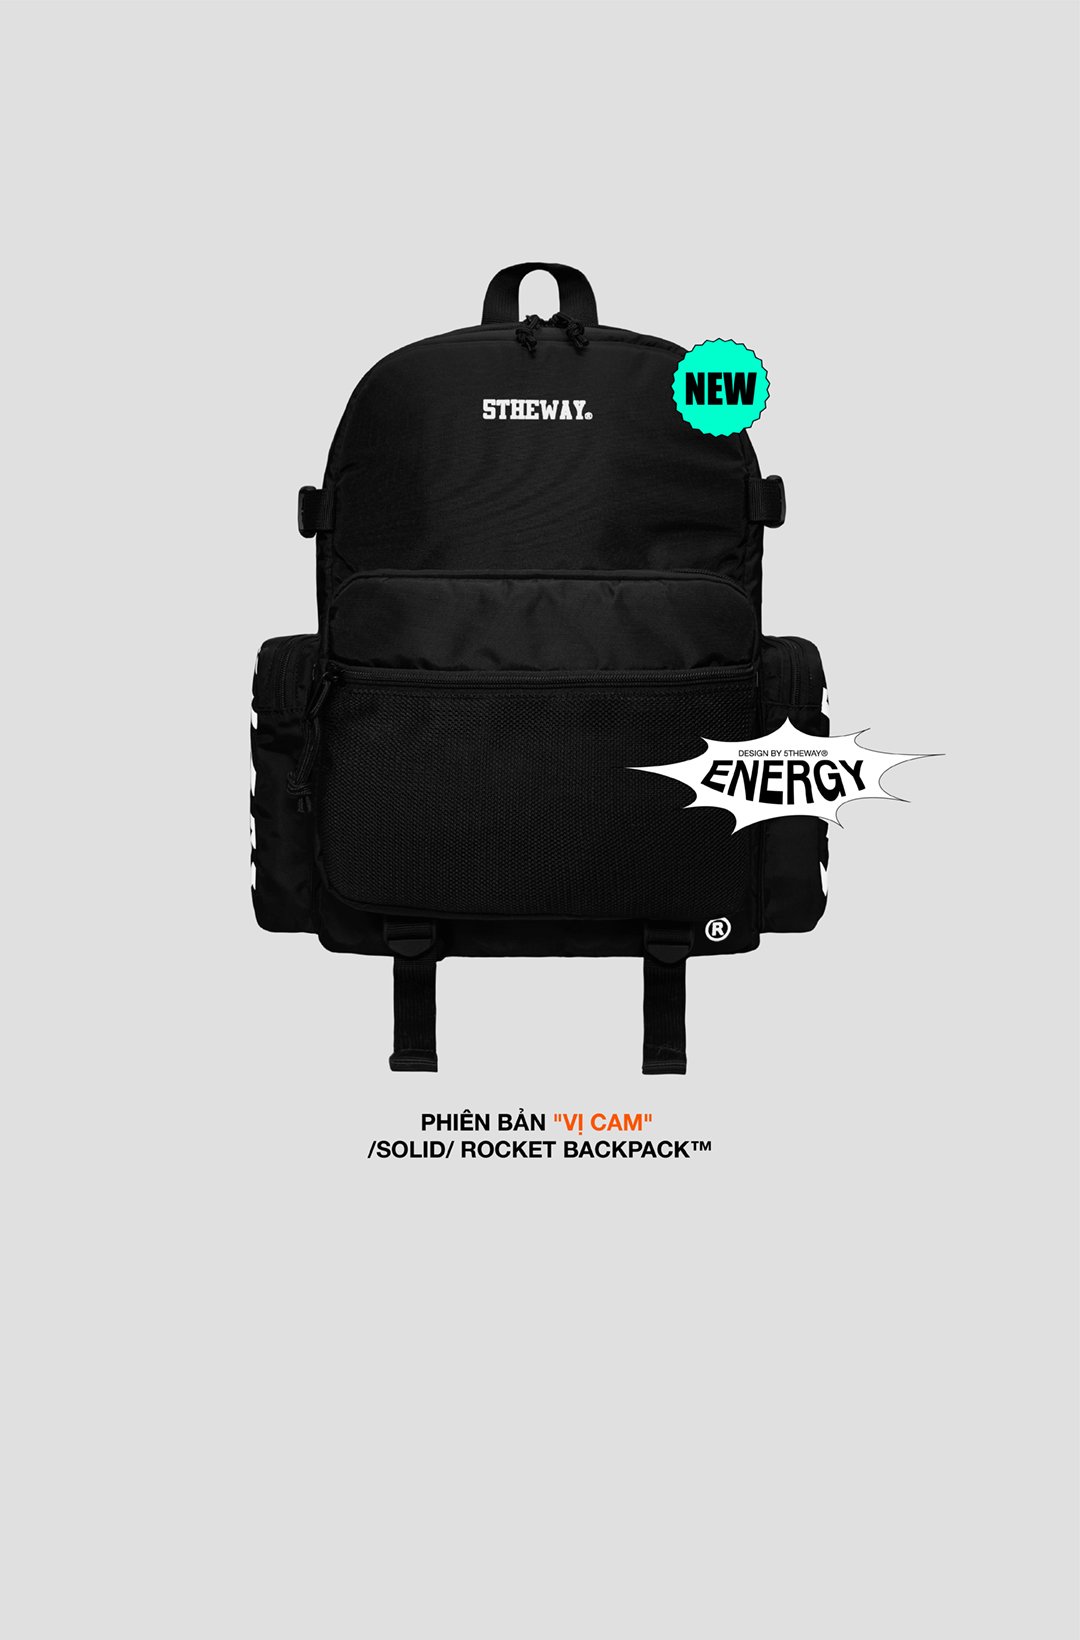 Balo 5THEWAY /solid/ ROCKET BACKPACK in BLACK/OR aka Balo Đen ruột Cam